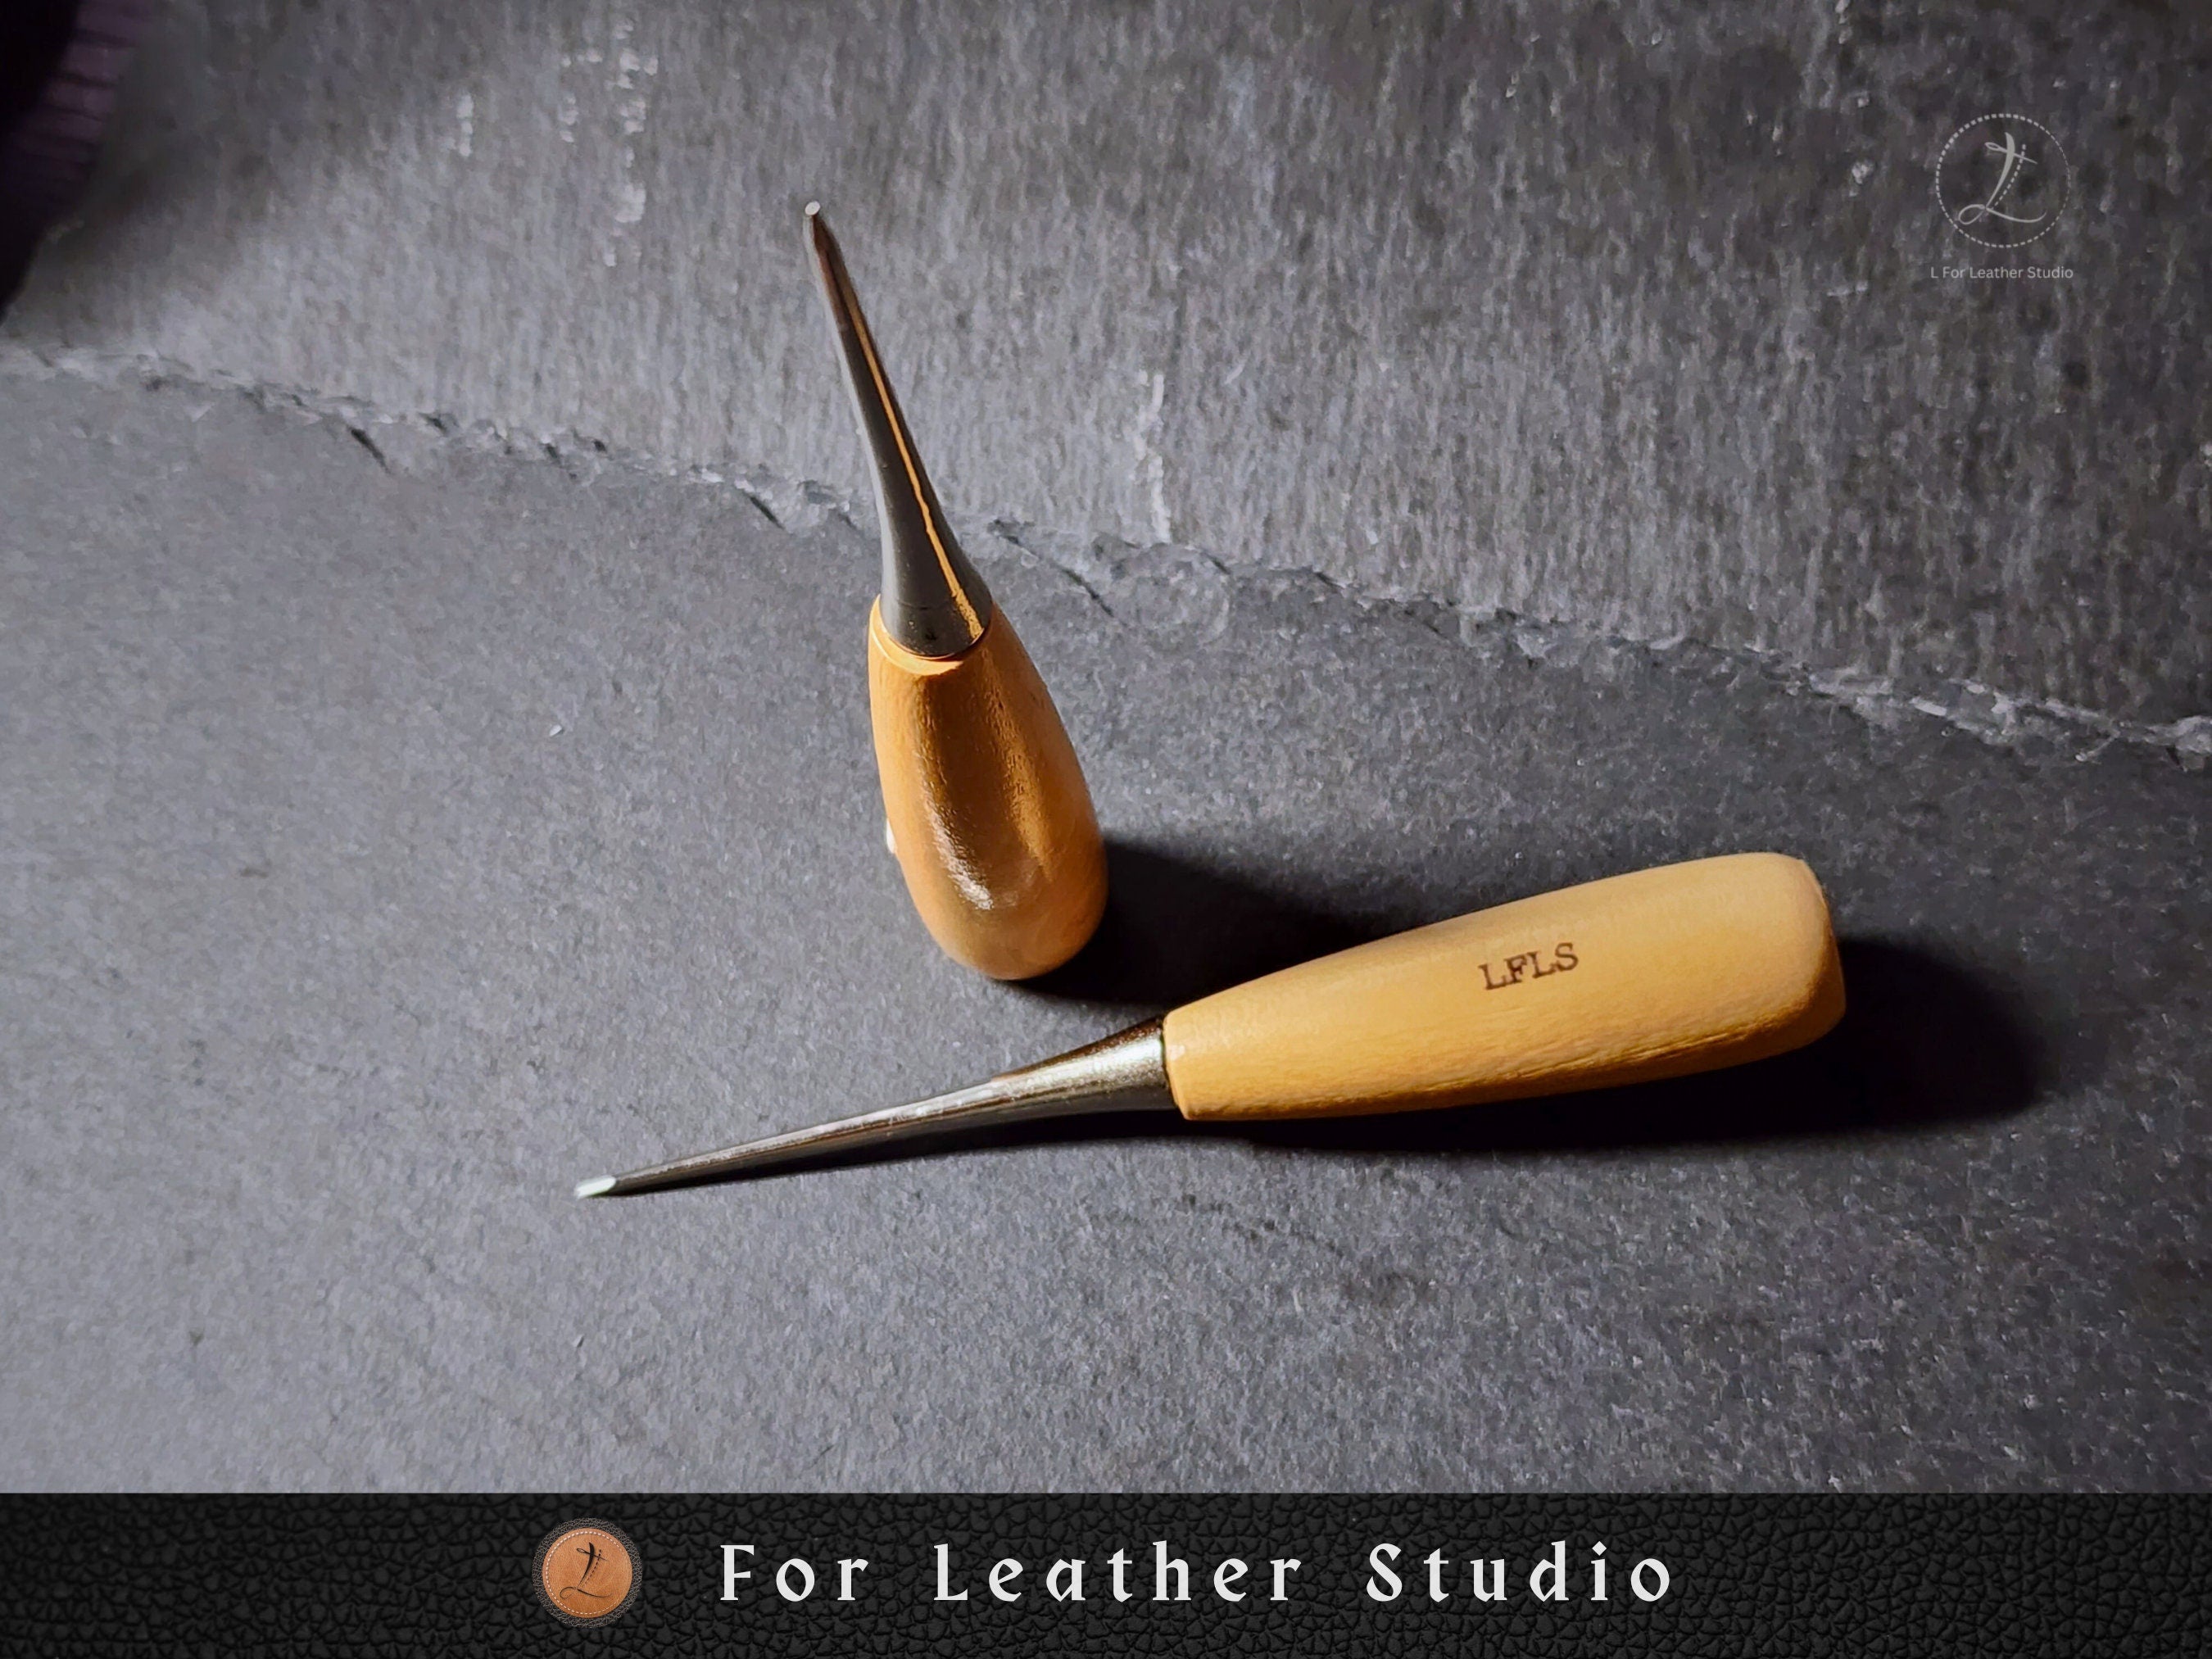 Personalized Sewing Awl, Solid wood handle, leather crafting leather work